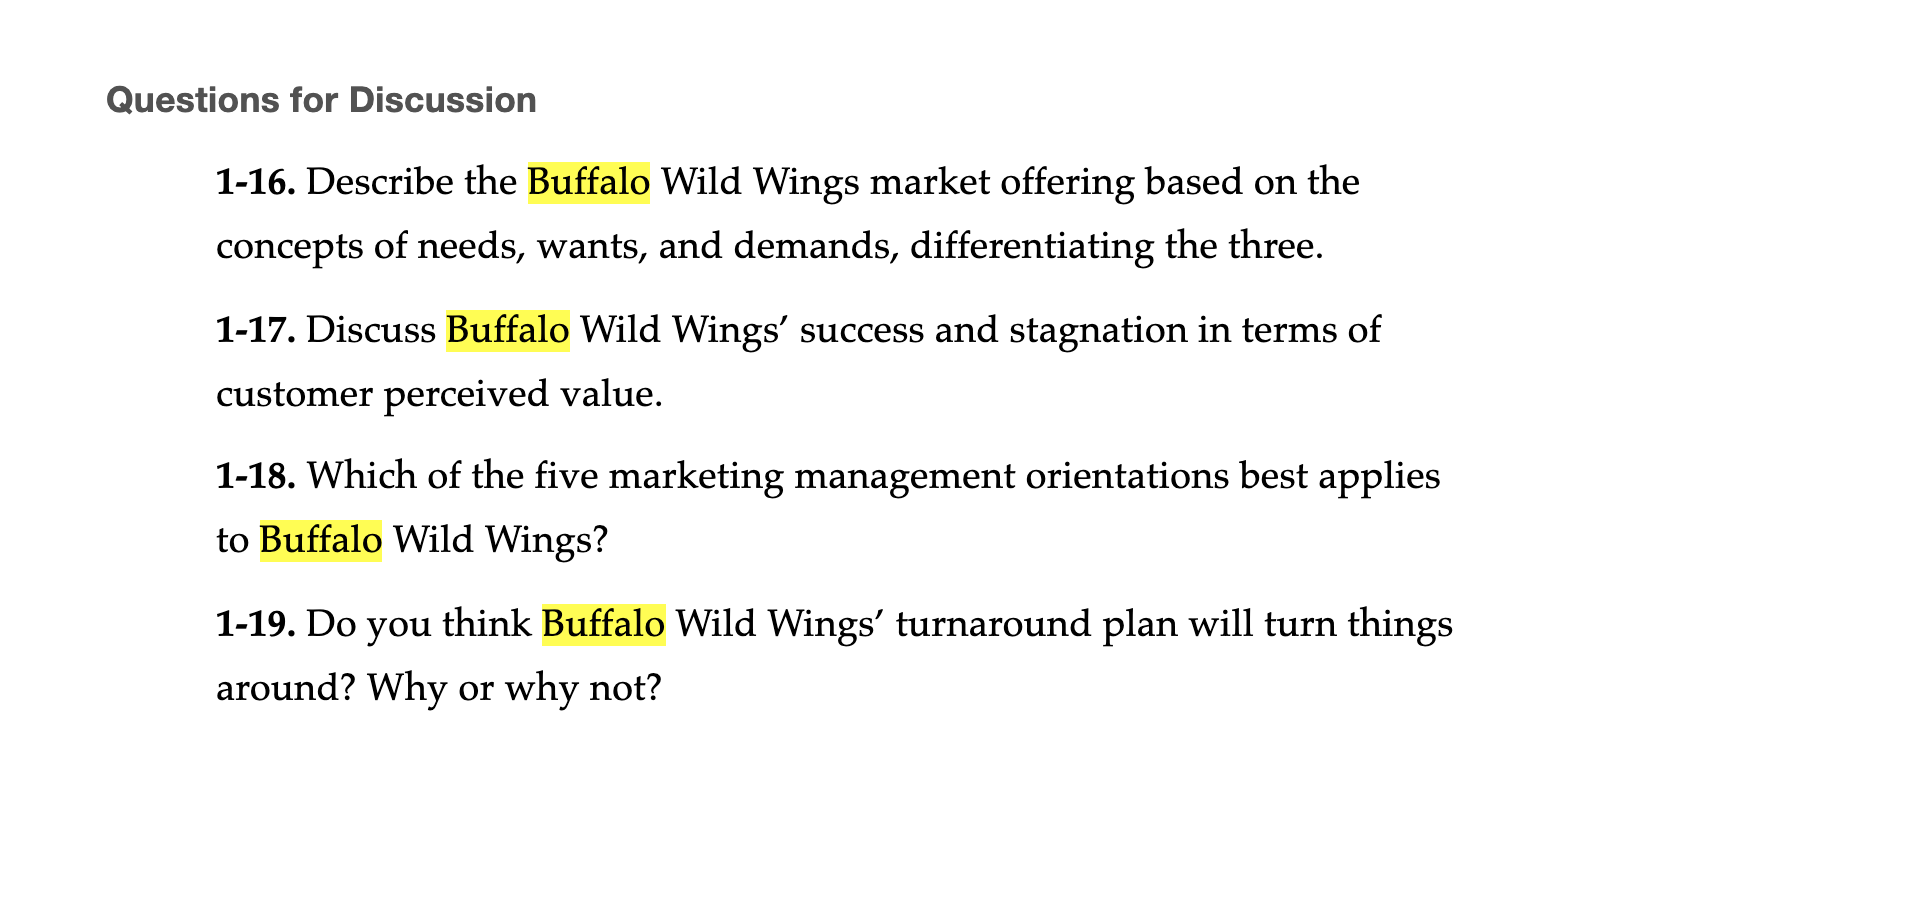 which of the five marketing management orientations best applies to buffalo wild wings